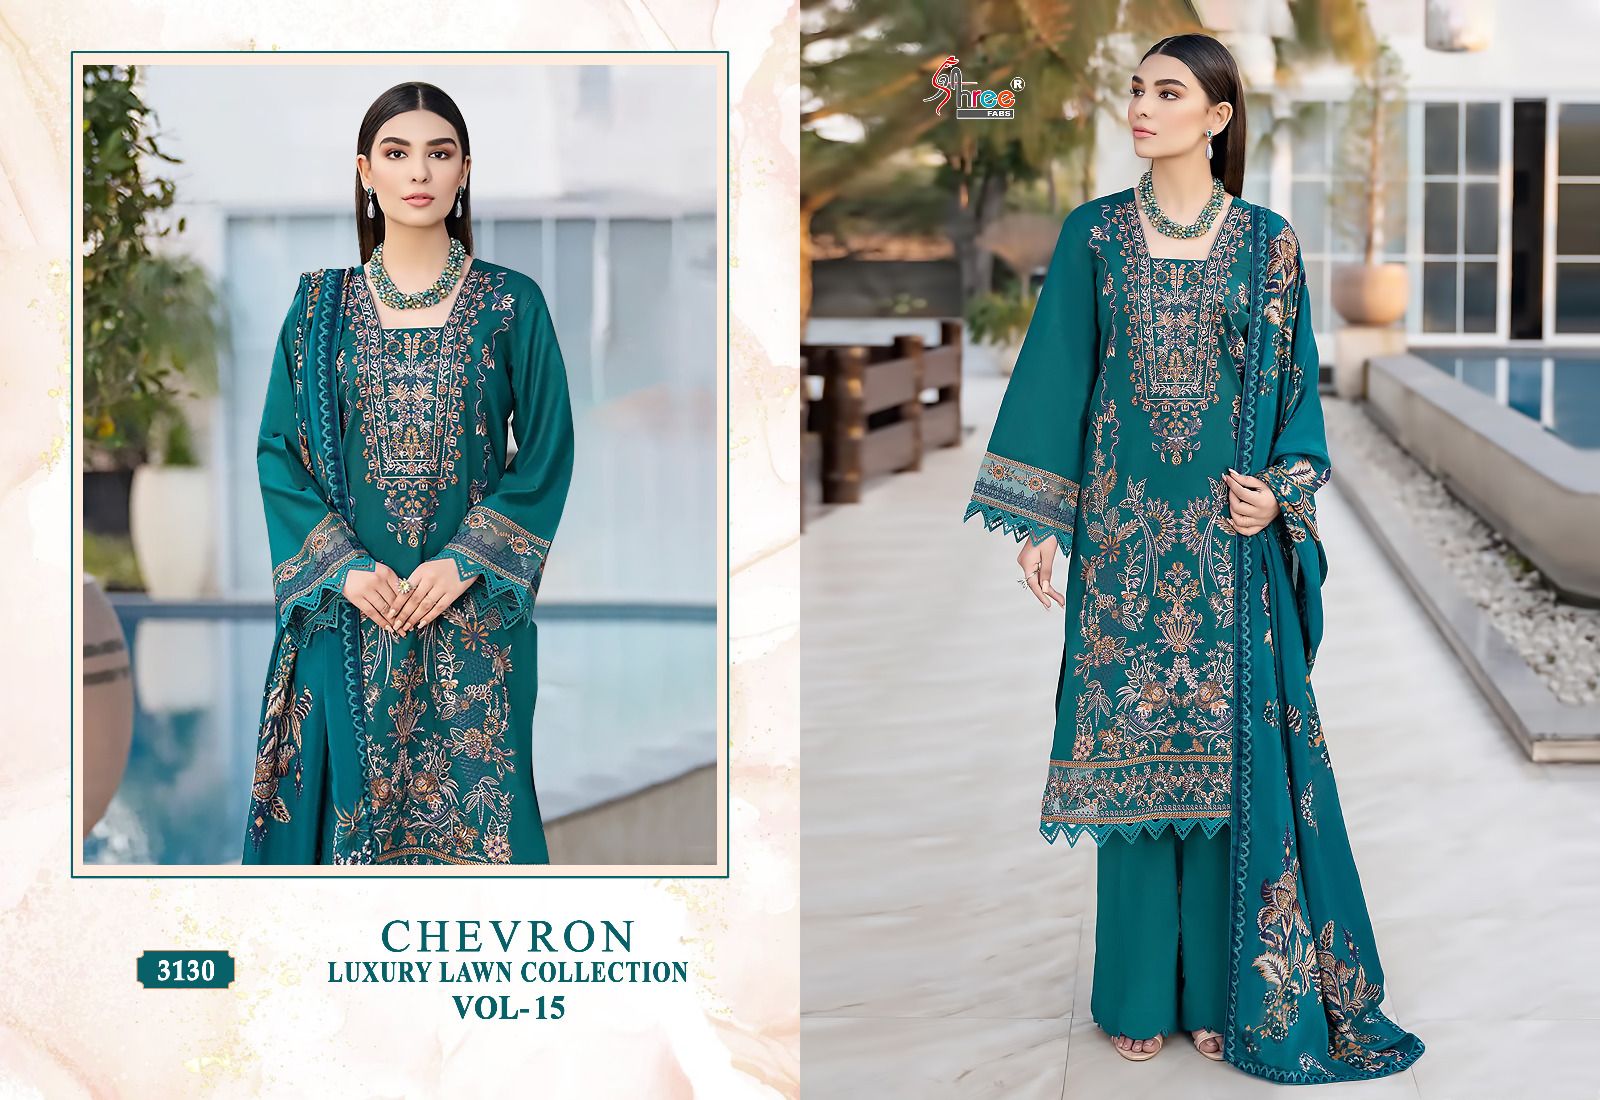 Shree Chevron Luxury Lawn Collection Vol 15 collection 1